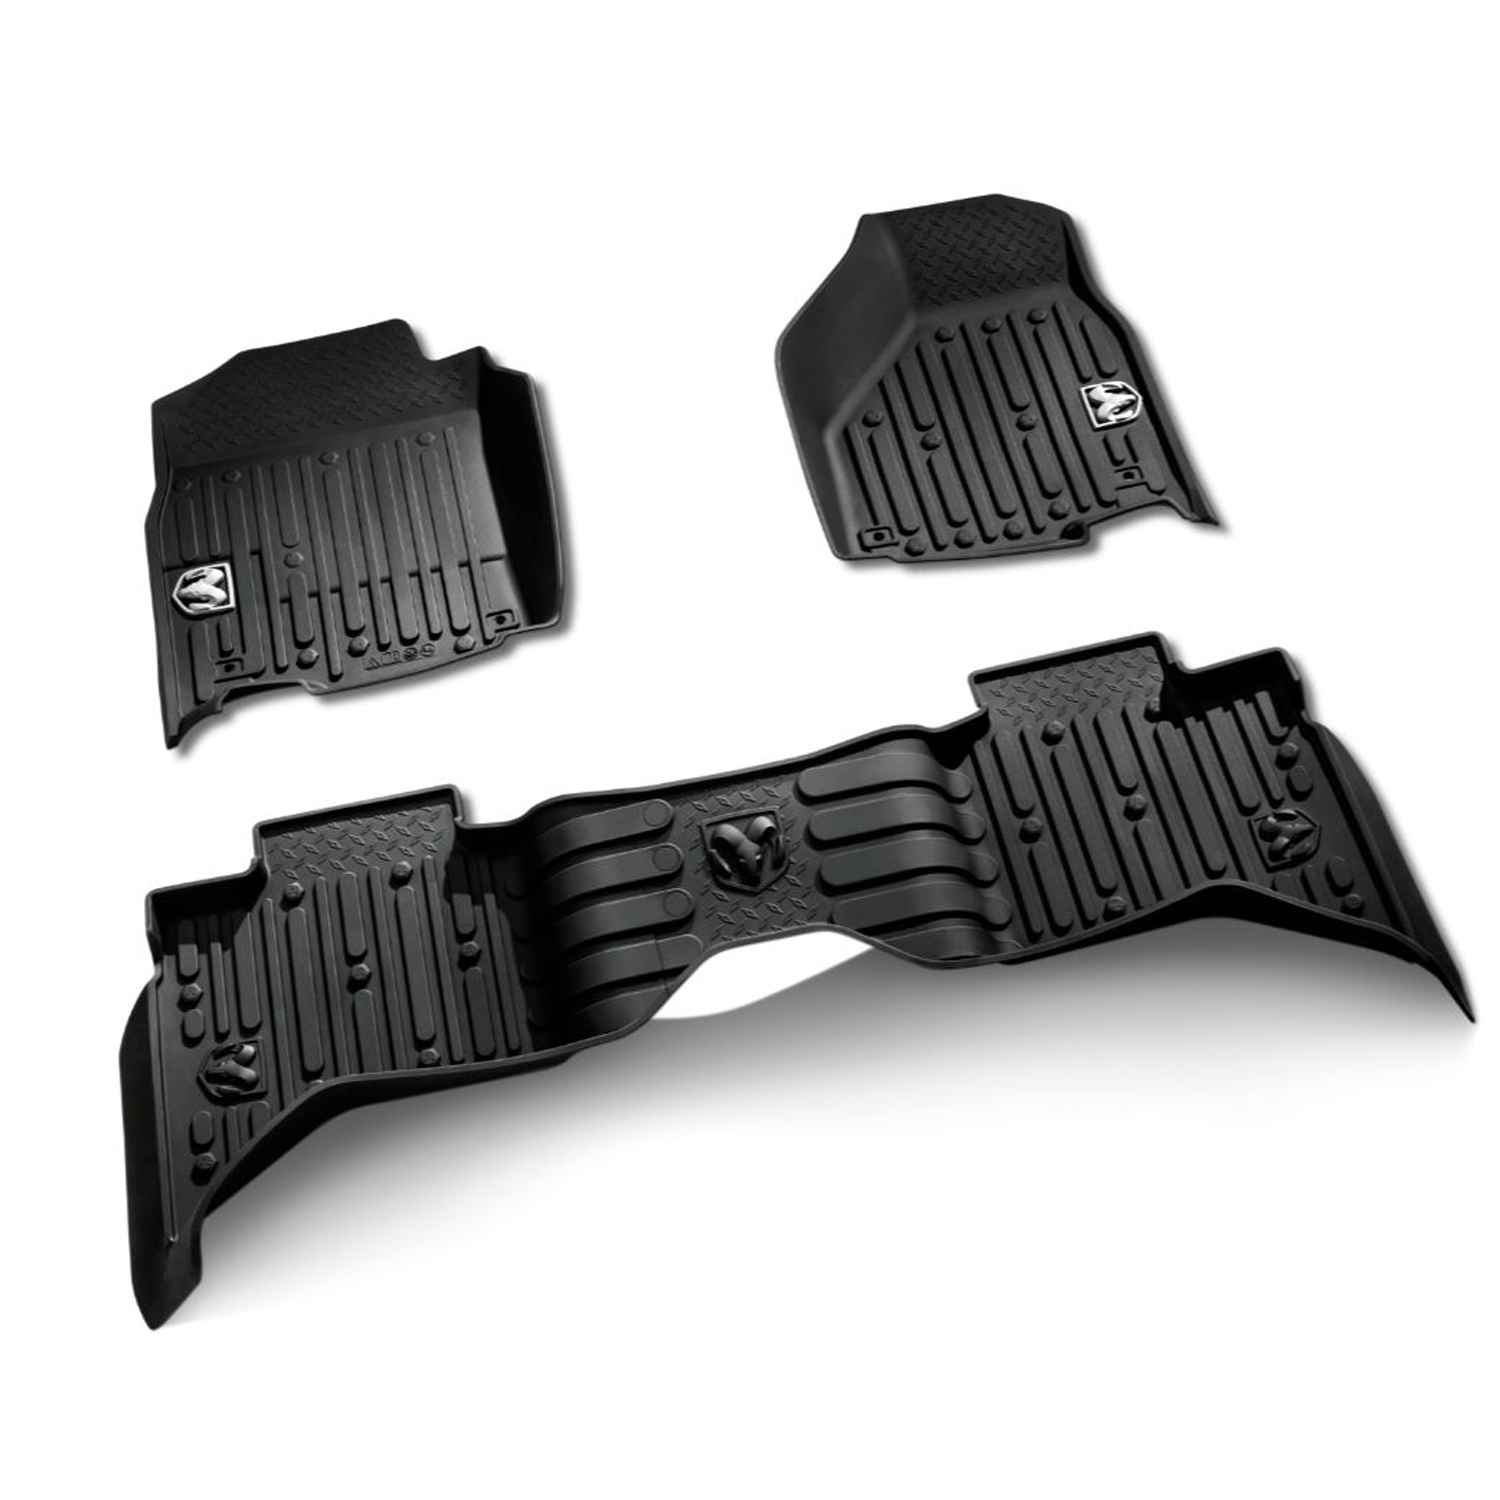 OEM 2014 Ram 5500 Chassis Cab All-weather Floor Mats, bucket-style, Regular Cab, Black (Part #82215579AB)